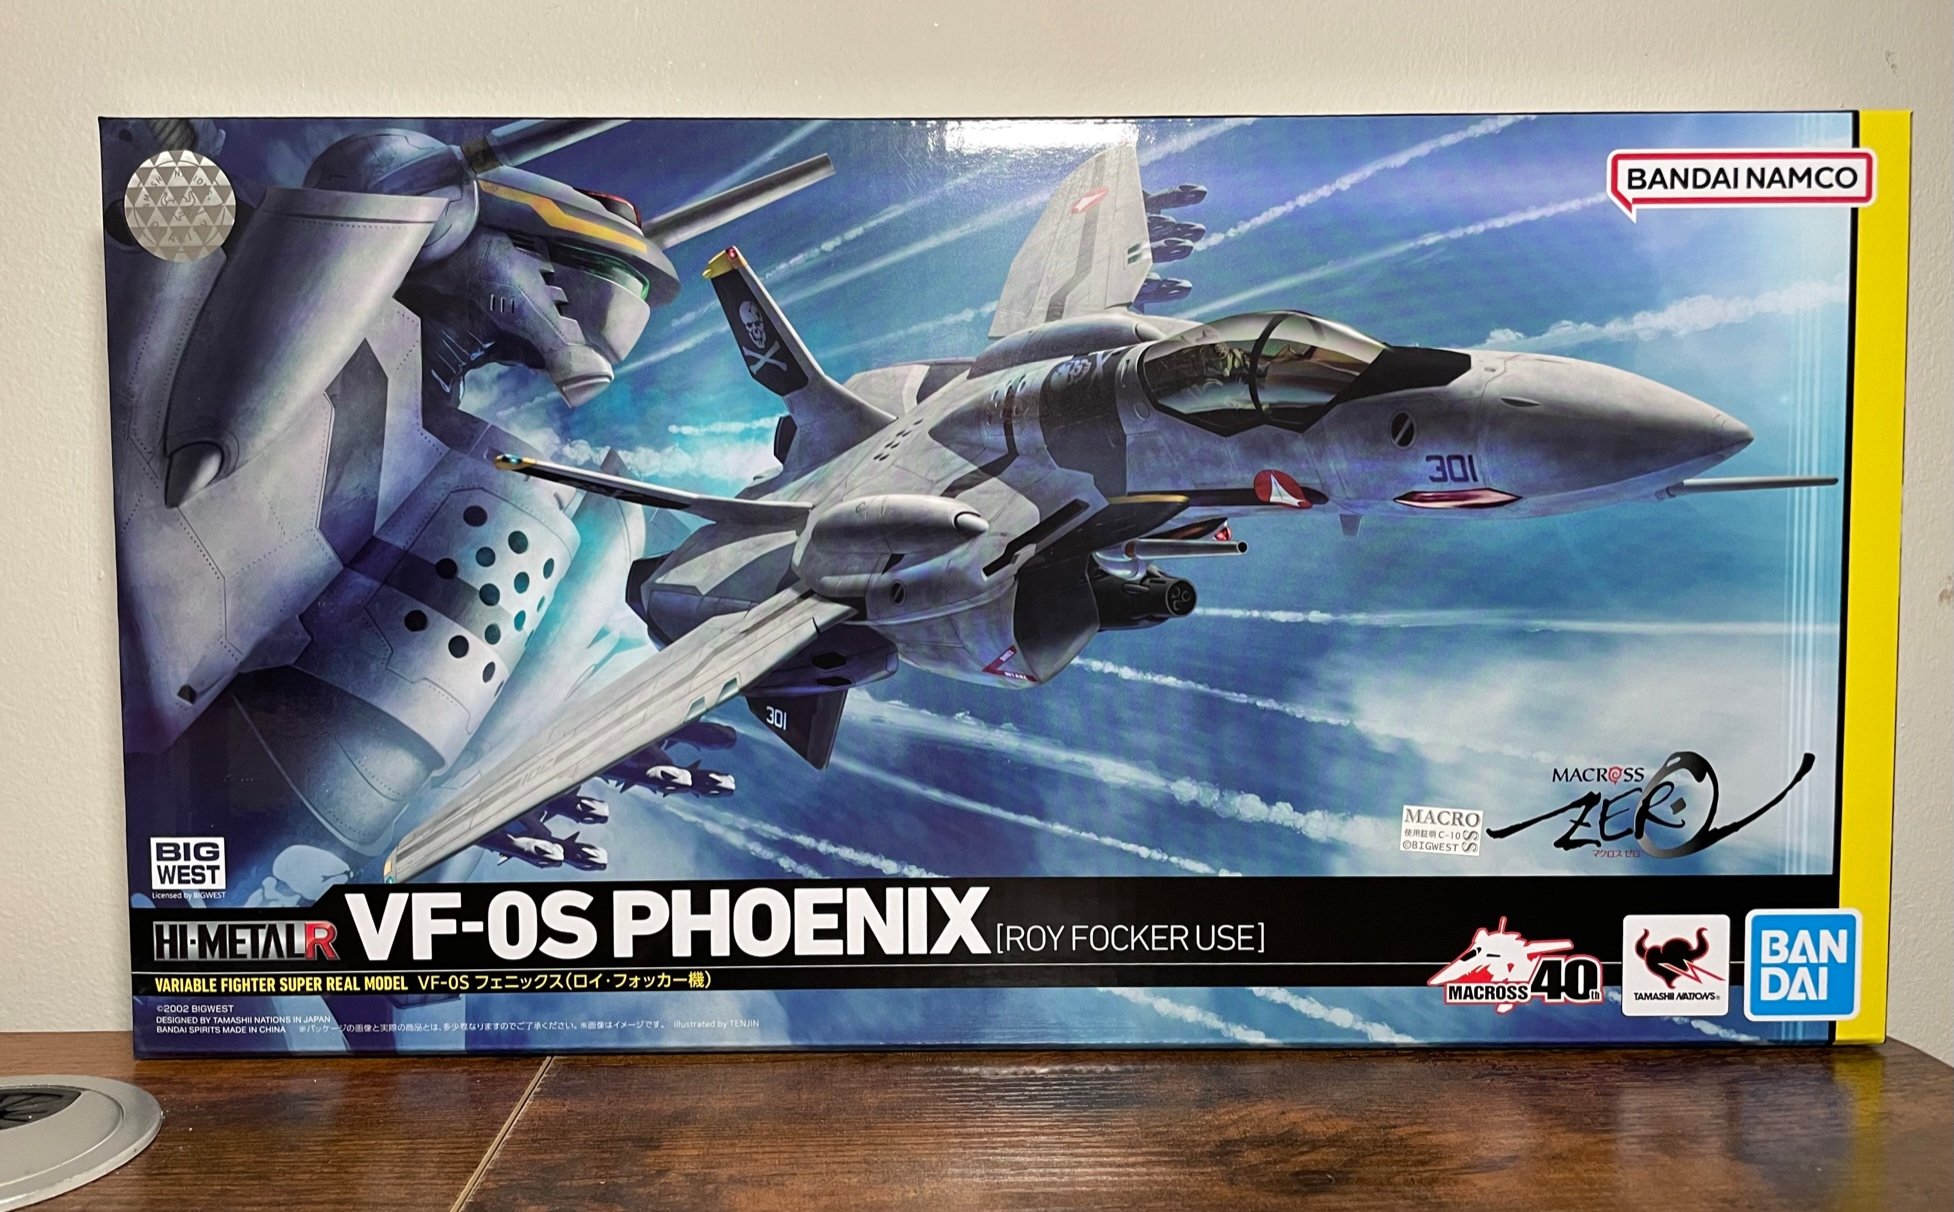 GaelHobbies features one of our favorite figures, Bandai VF-OS Phoenix ...